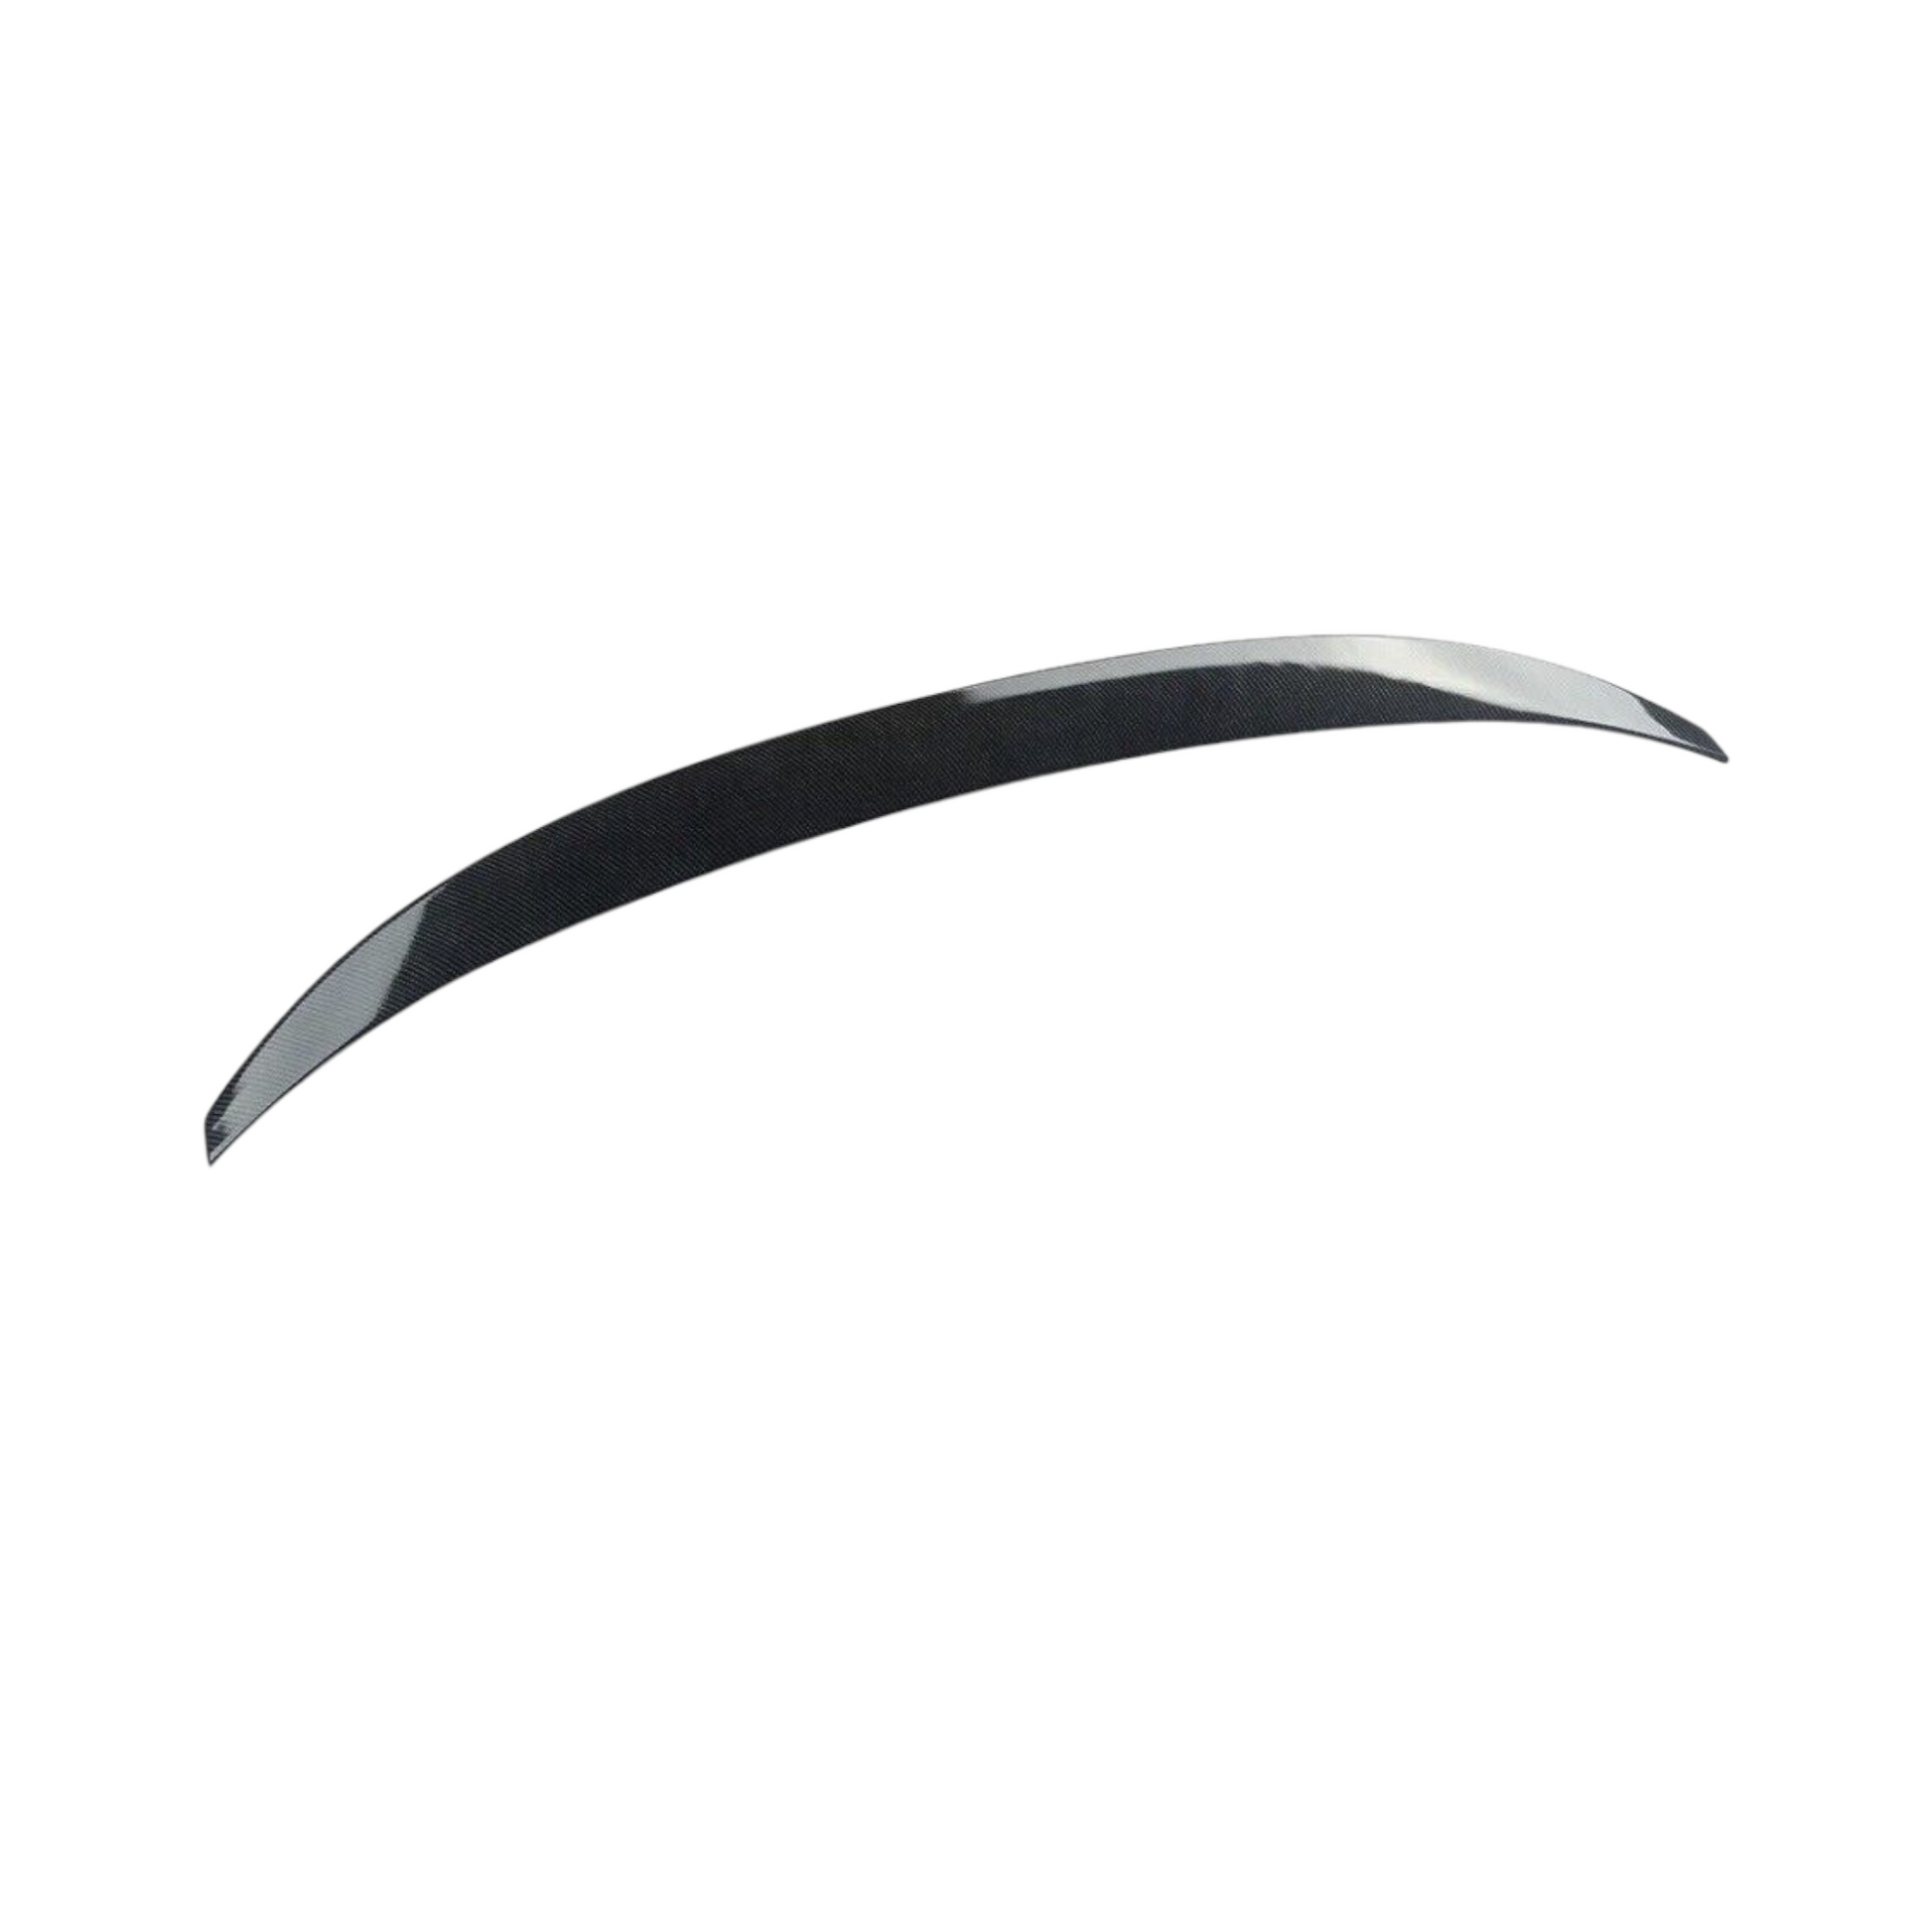 BMW 2 Series F22 Coupe Boot spoiler Matte black - BMW Body Kits Performance Styling